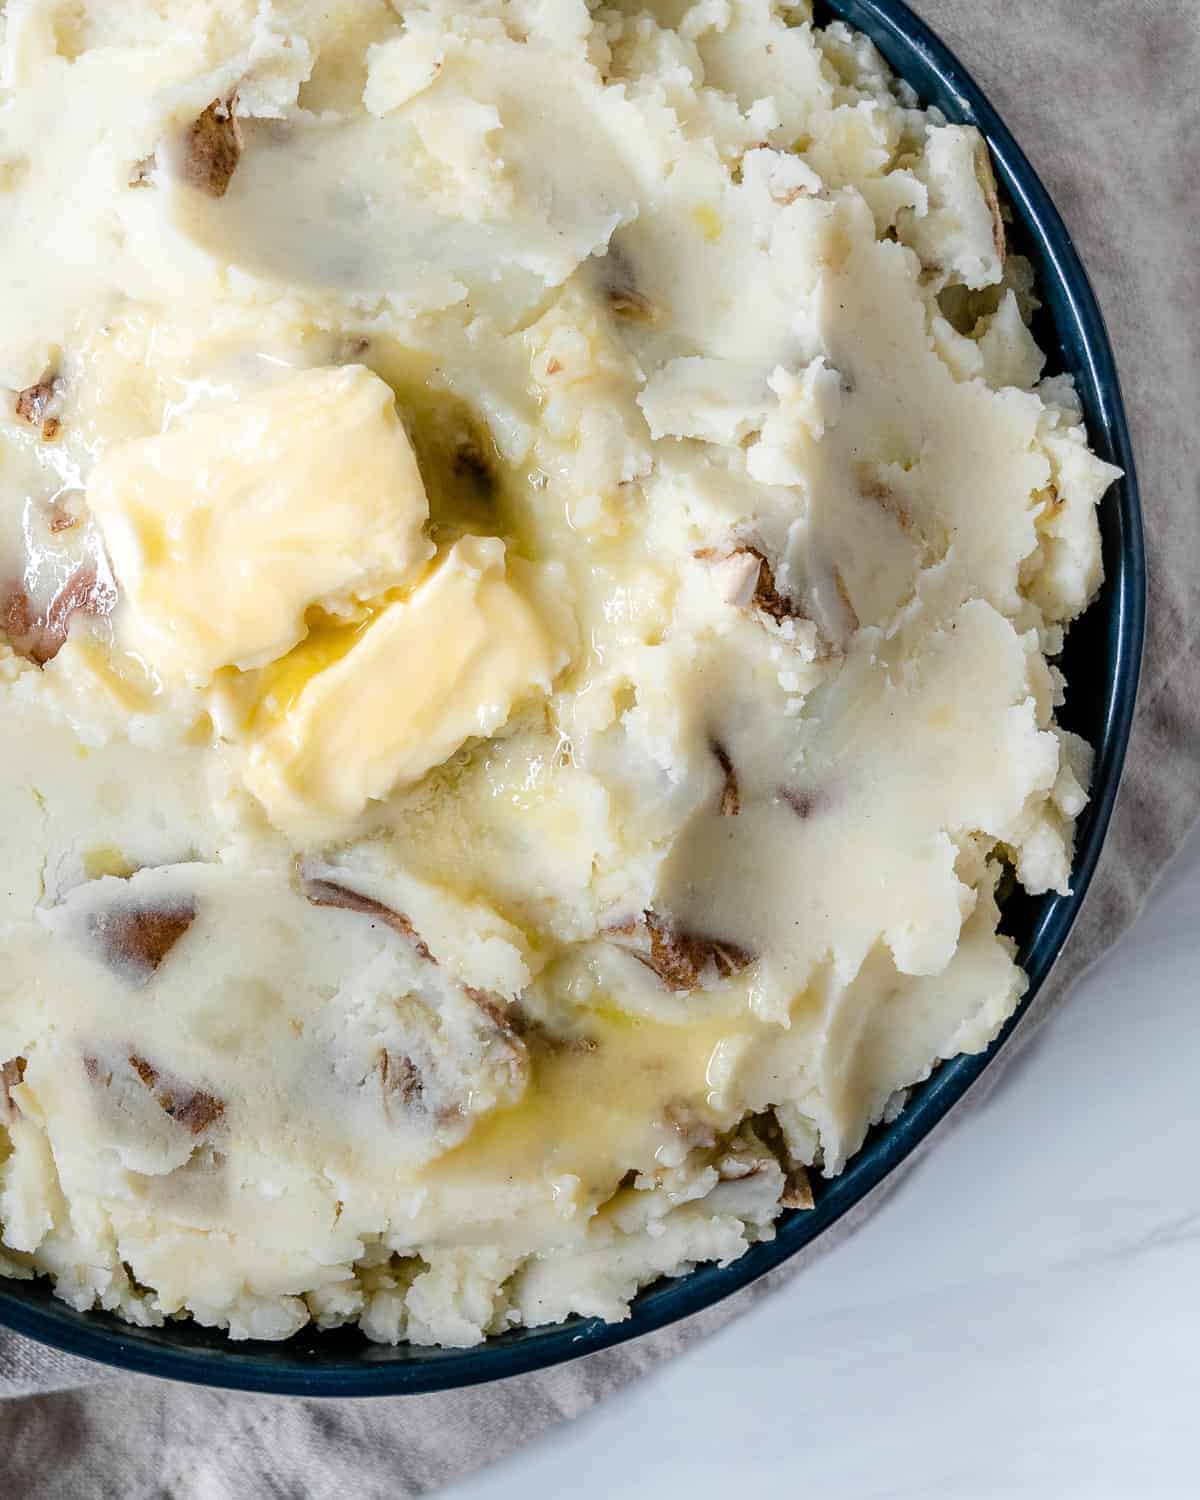 completed vegan mashed potatoes plated against white surface